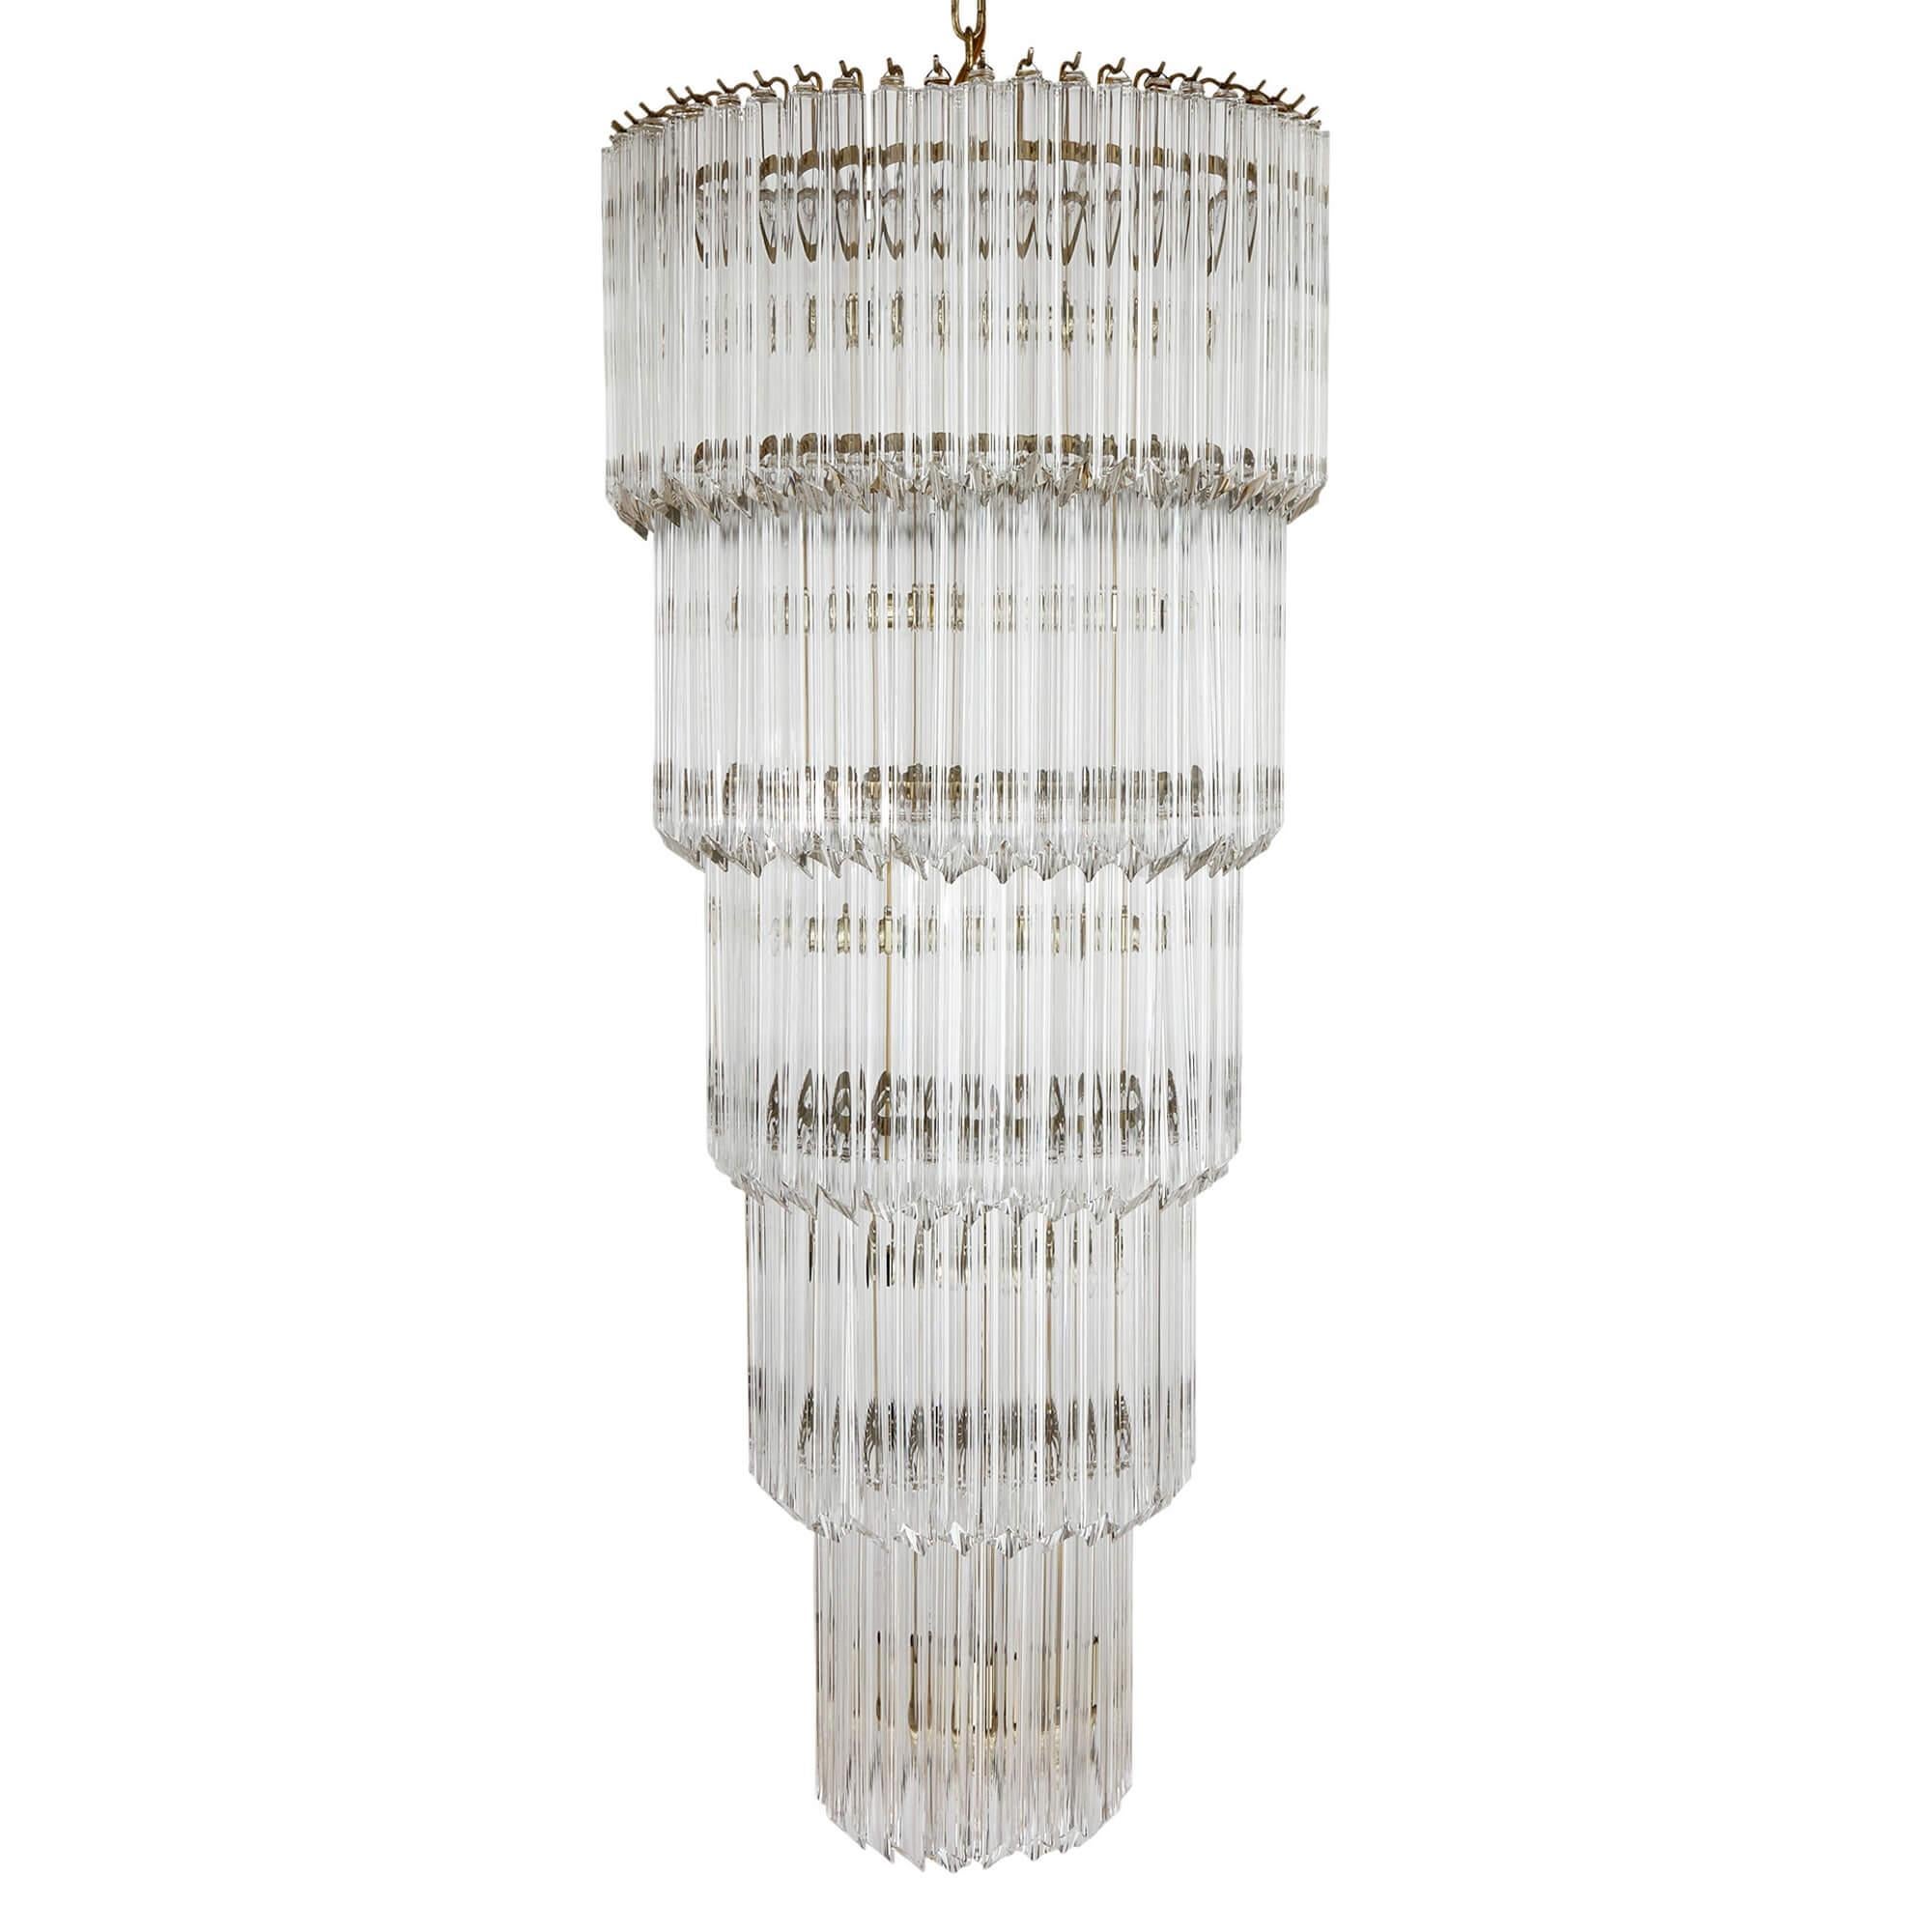 Midcentury Italian Murano glass and ormolu chandelier 
Italian, Mid-20th century 
Height 126cm, diameter 56cm

This stunning Murano glass and ormolu chandelier has been produced by Camer. It is an exquisite example of Italian midcentury design